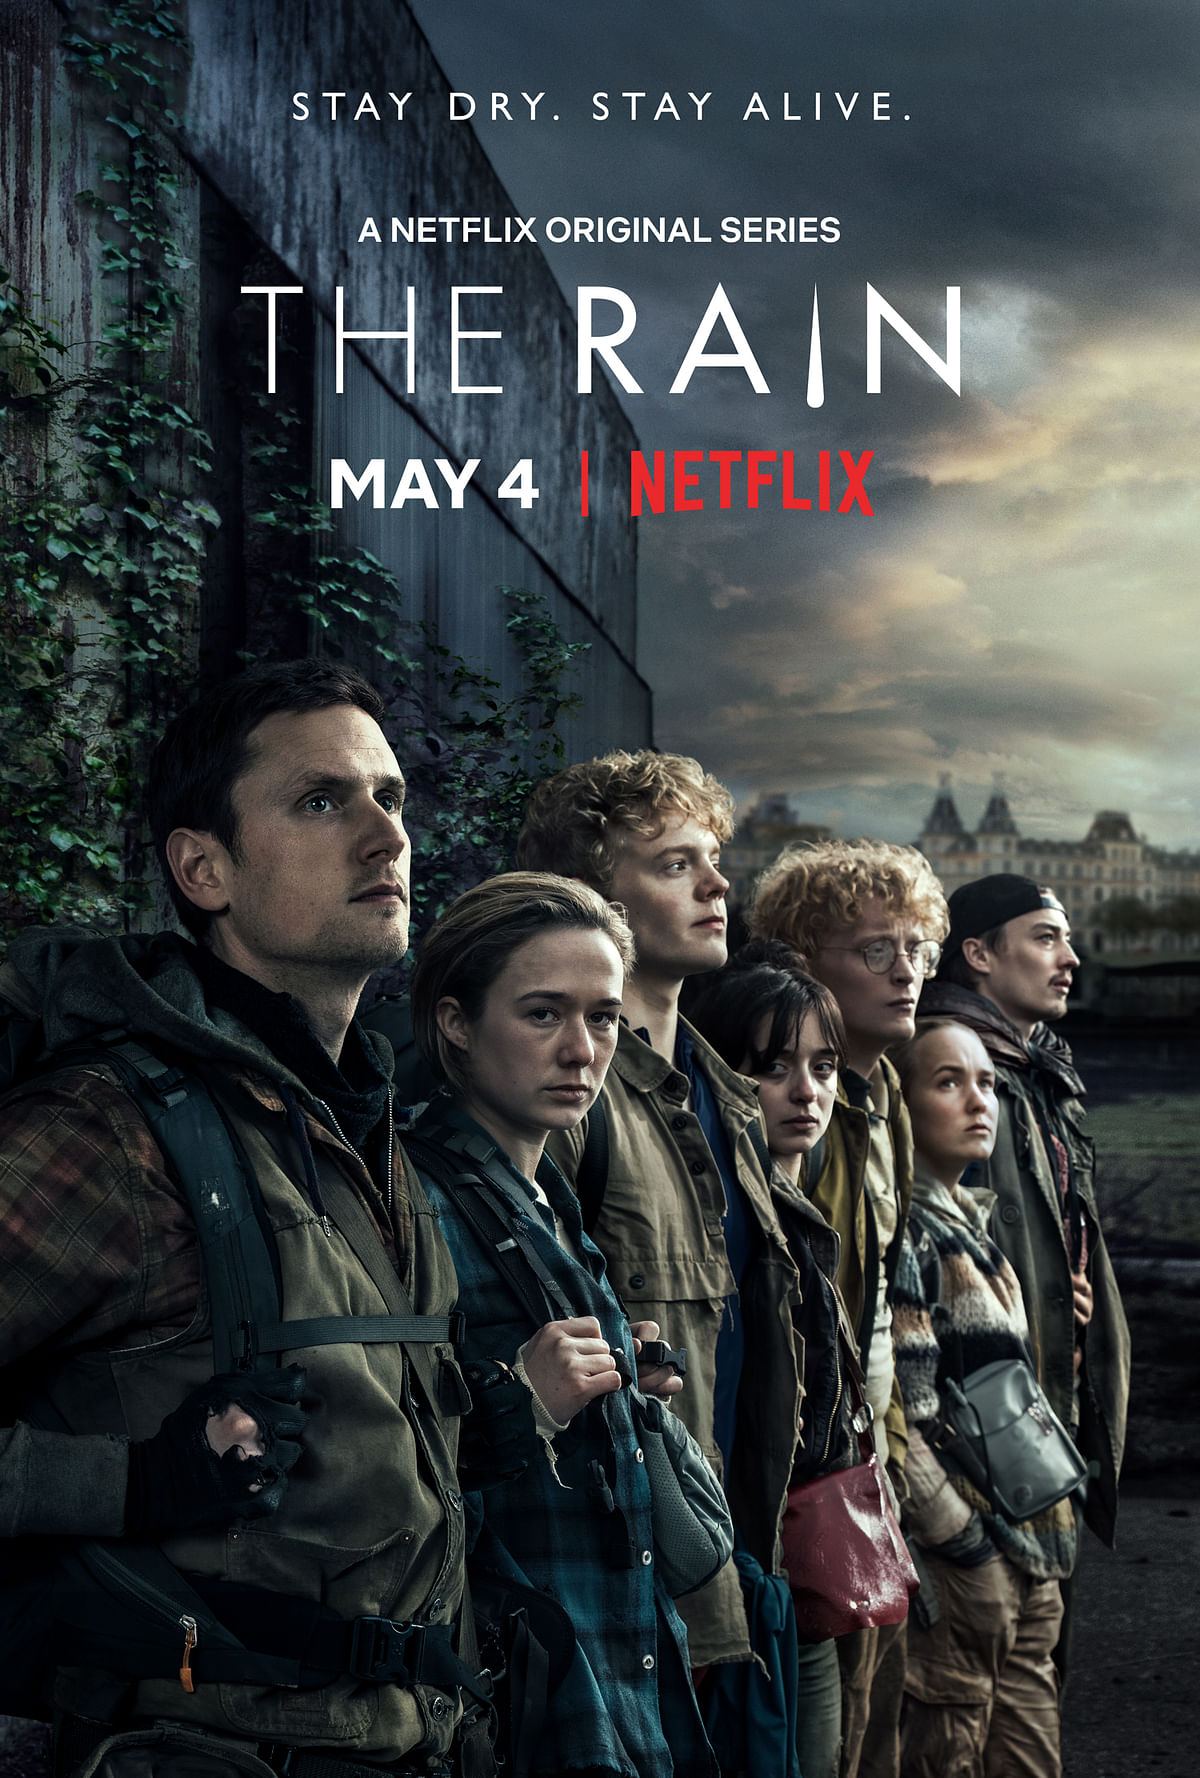 Check out the trailer of the new Scandinavian Netflix series, ‘The Rain’.